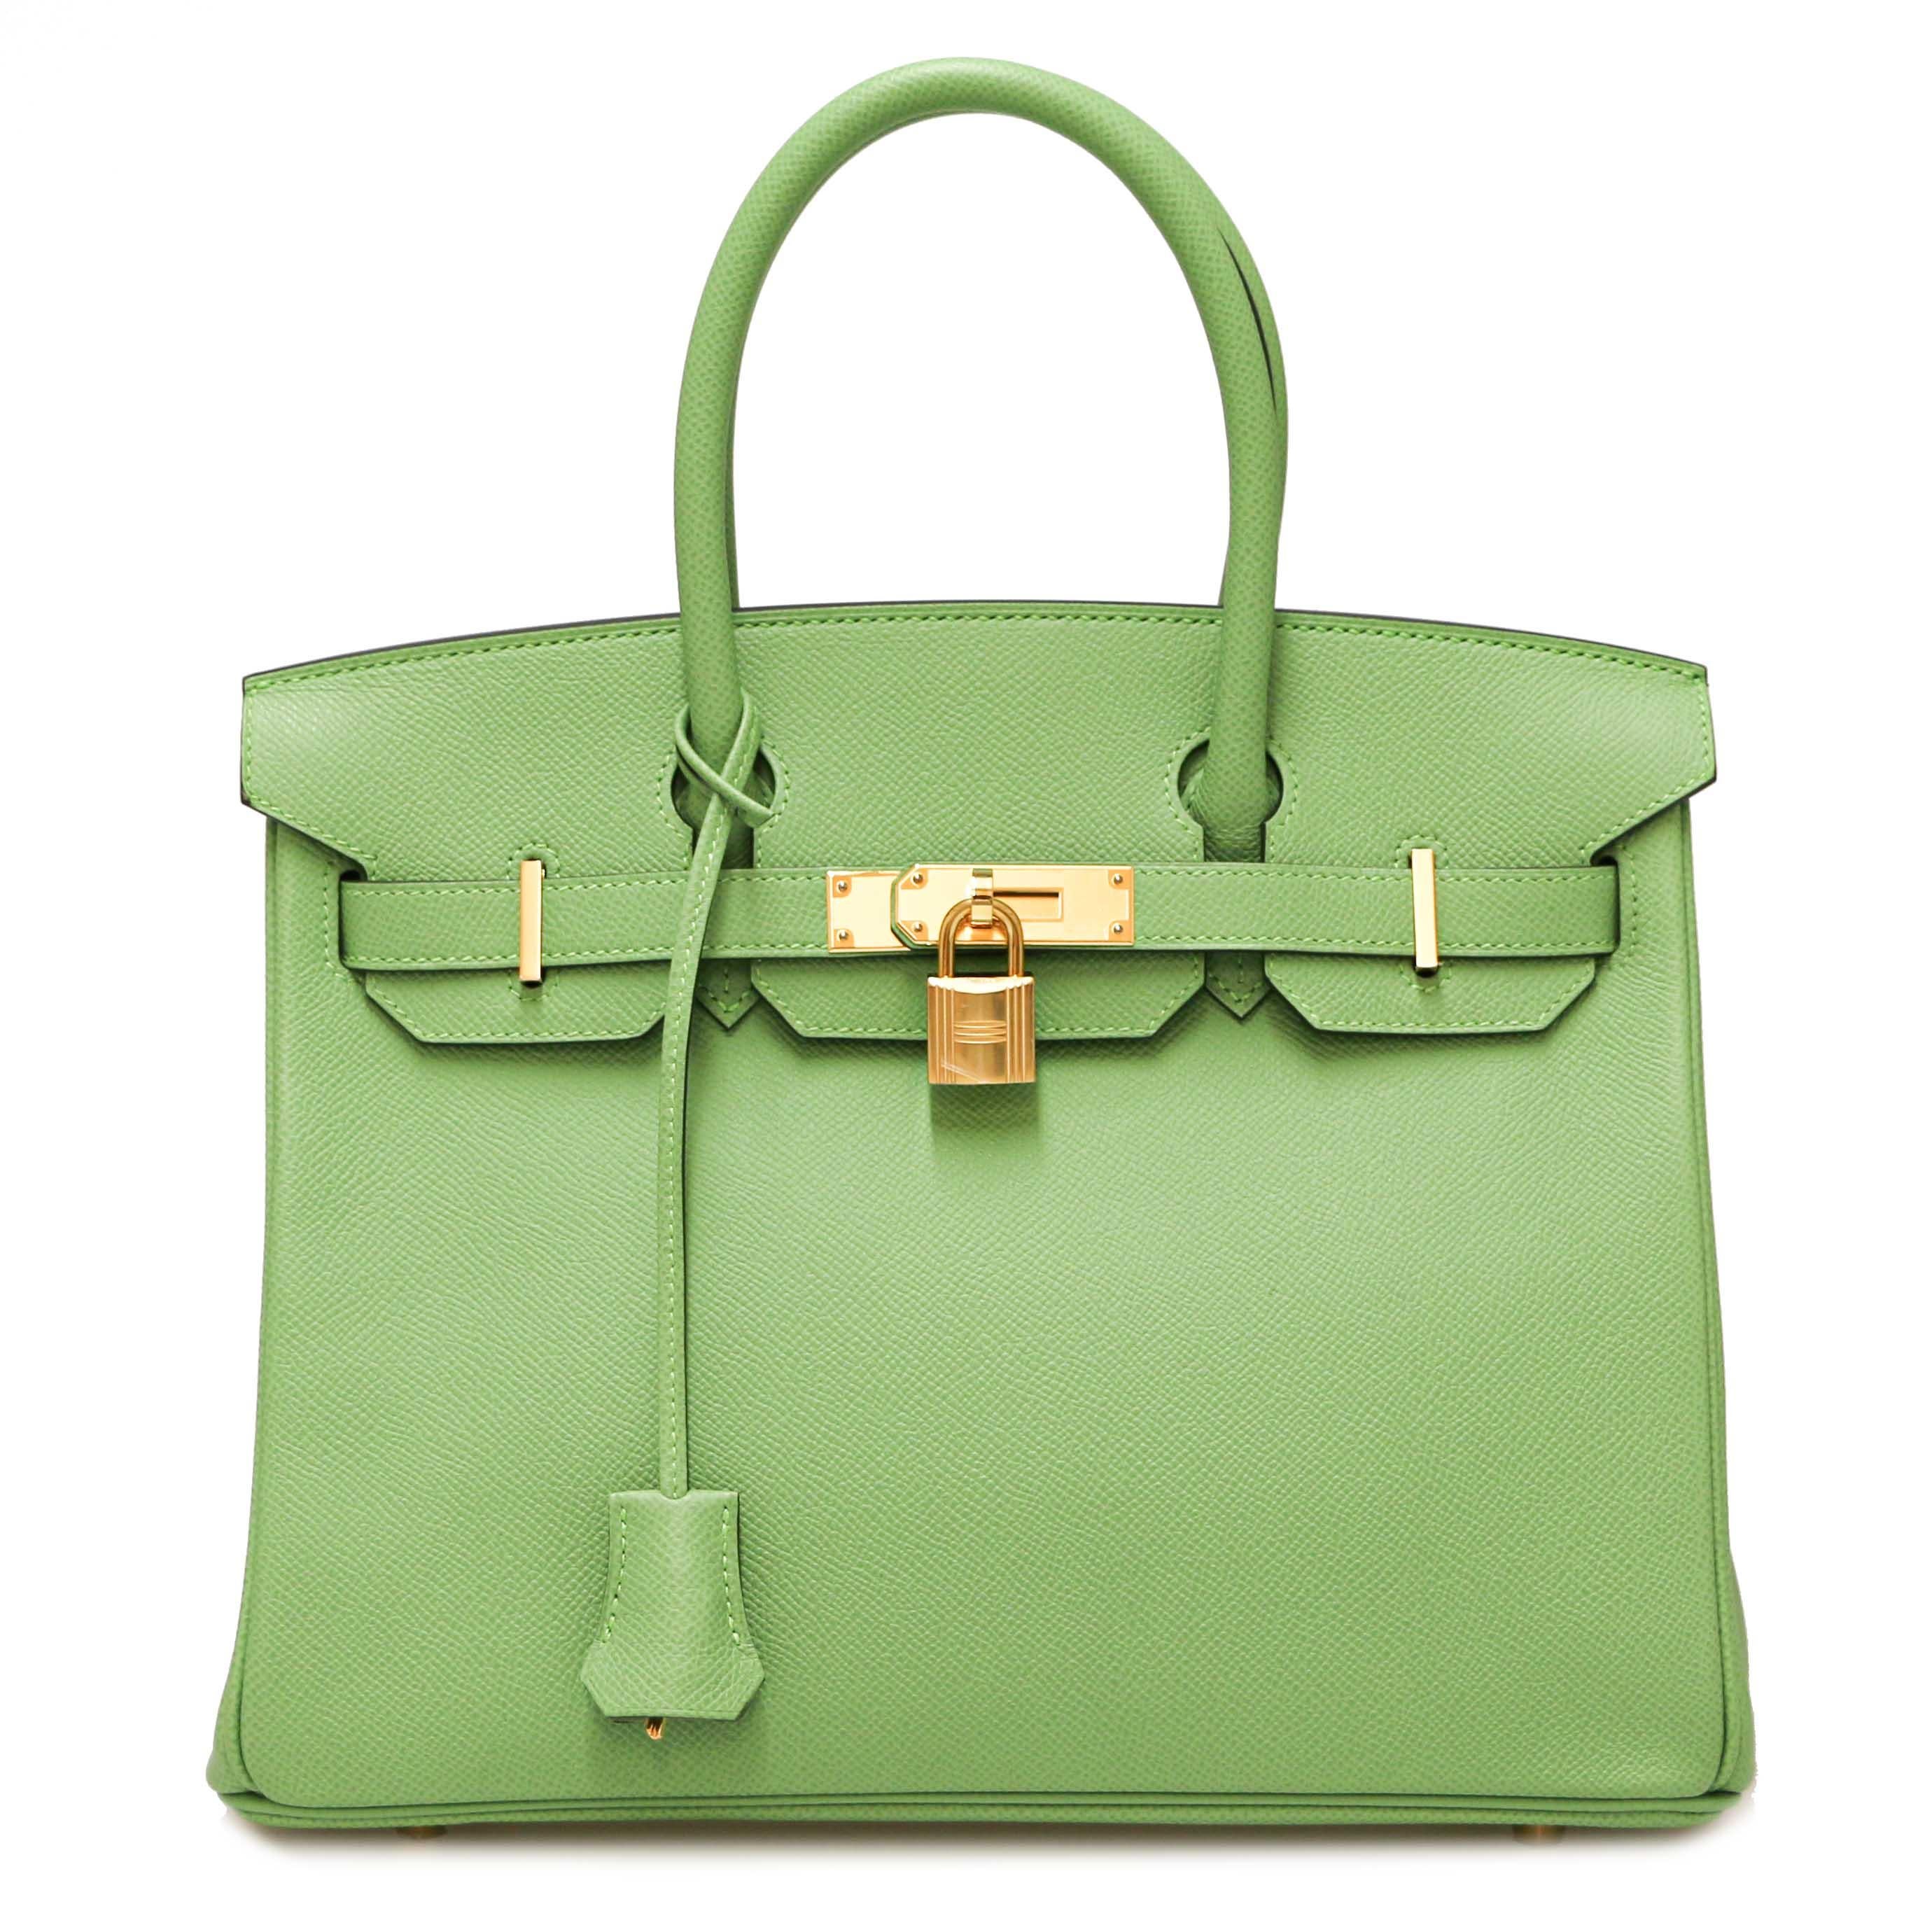 Amazing Birkin 30 in Cricket Green Epsom leather. The plastics are still on the jewelry. Padlock, zipper pull, bell and keys (2) are present.
The bag is in very good condition and has only been worn once, it's a recent model.
Made in